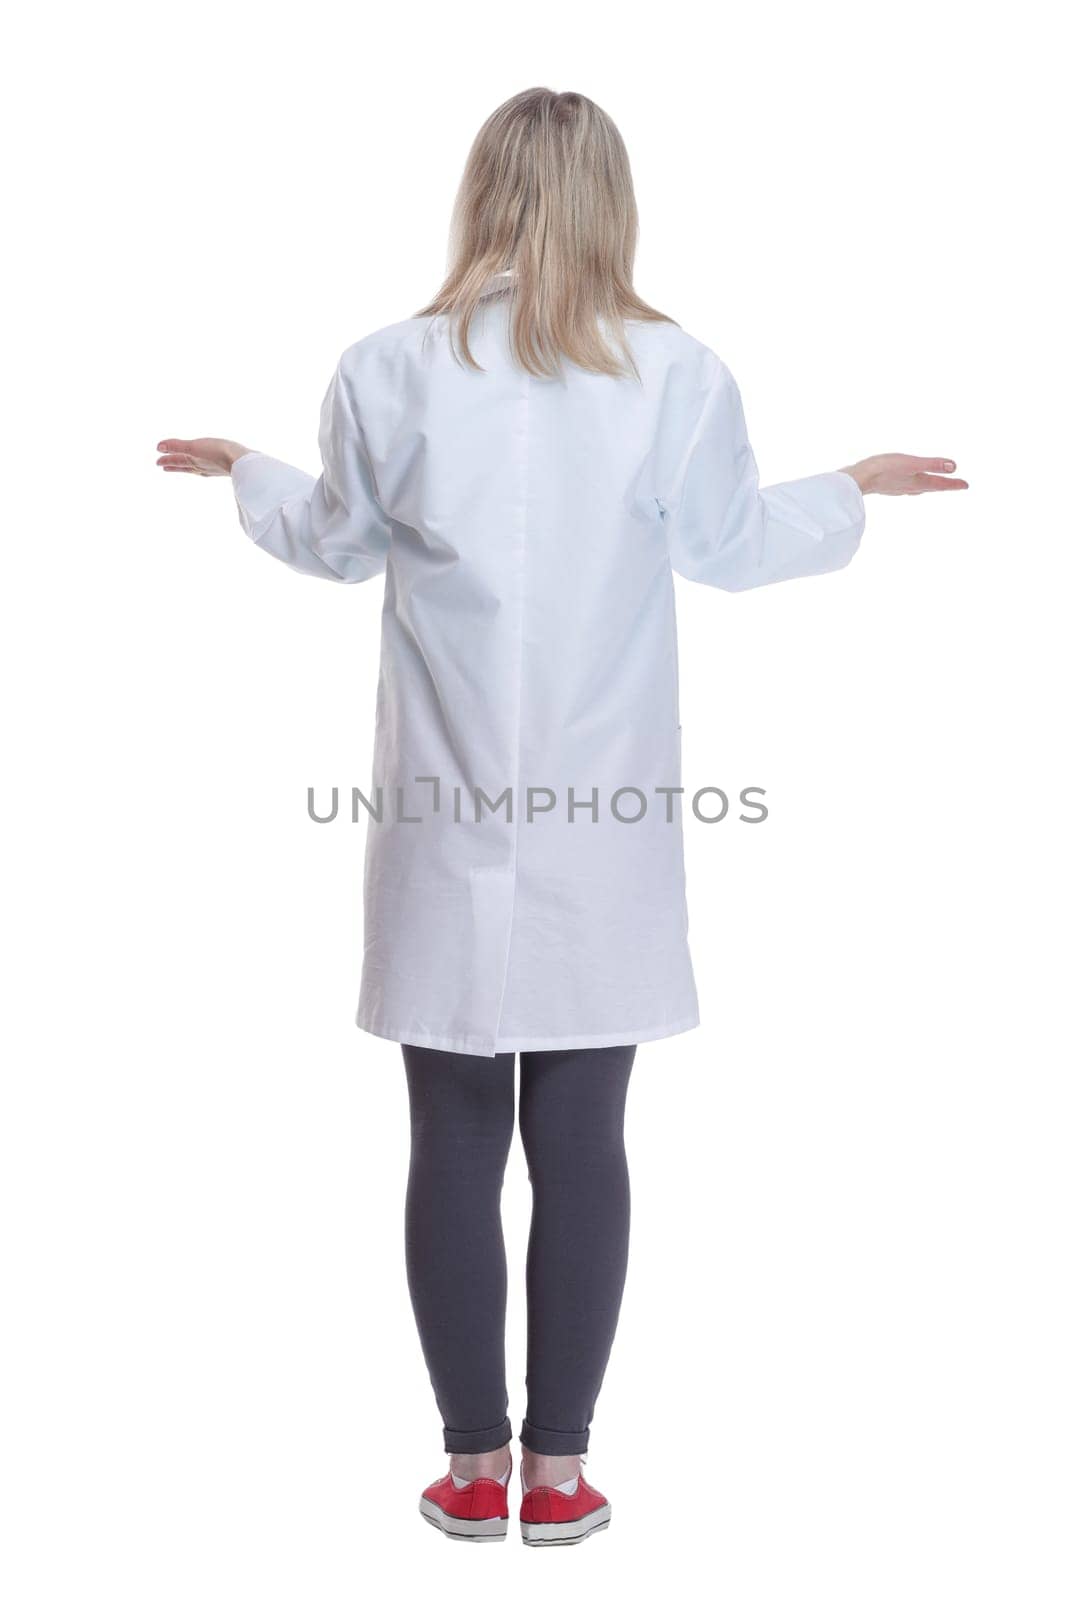 female medic looking at a white screen . isolated on a white background. by asdf